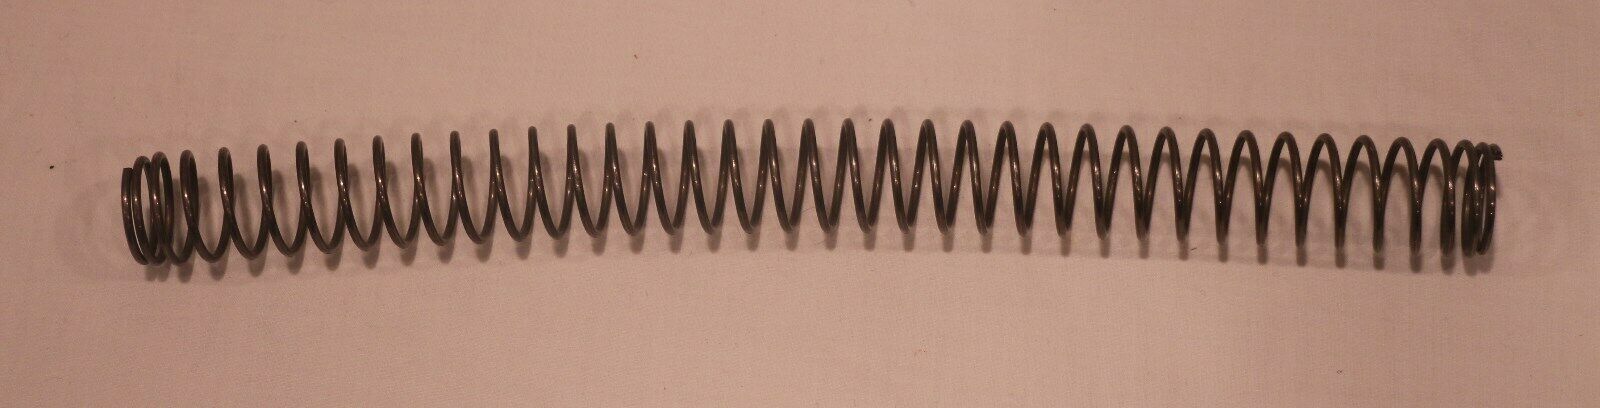 223 5.56 FIXED STOCK RECOIL SPRING RRA